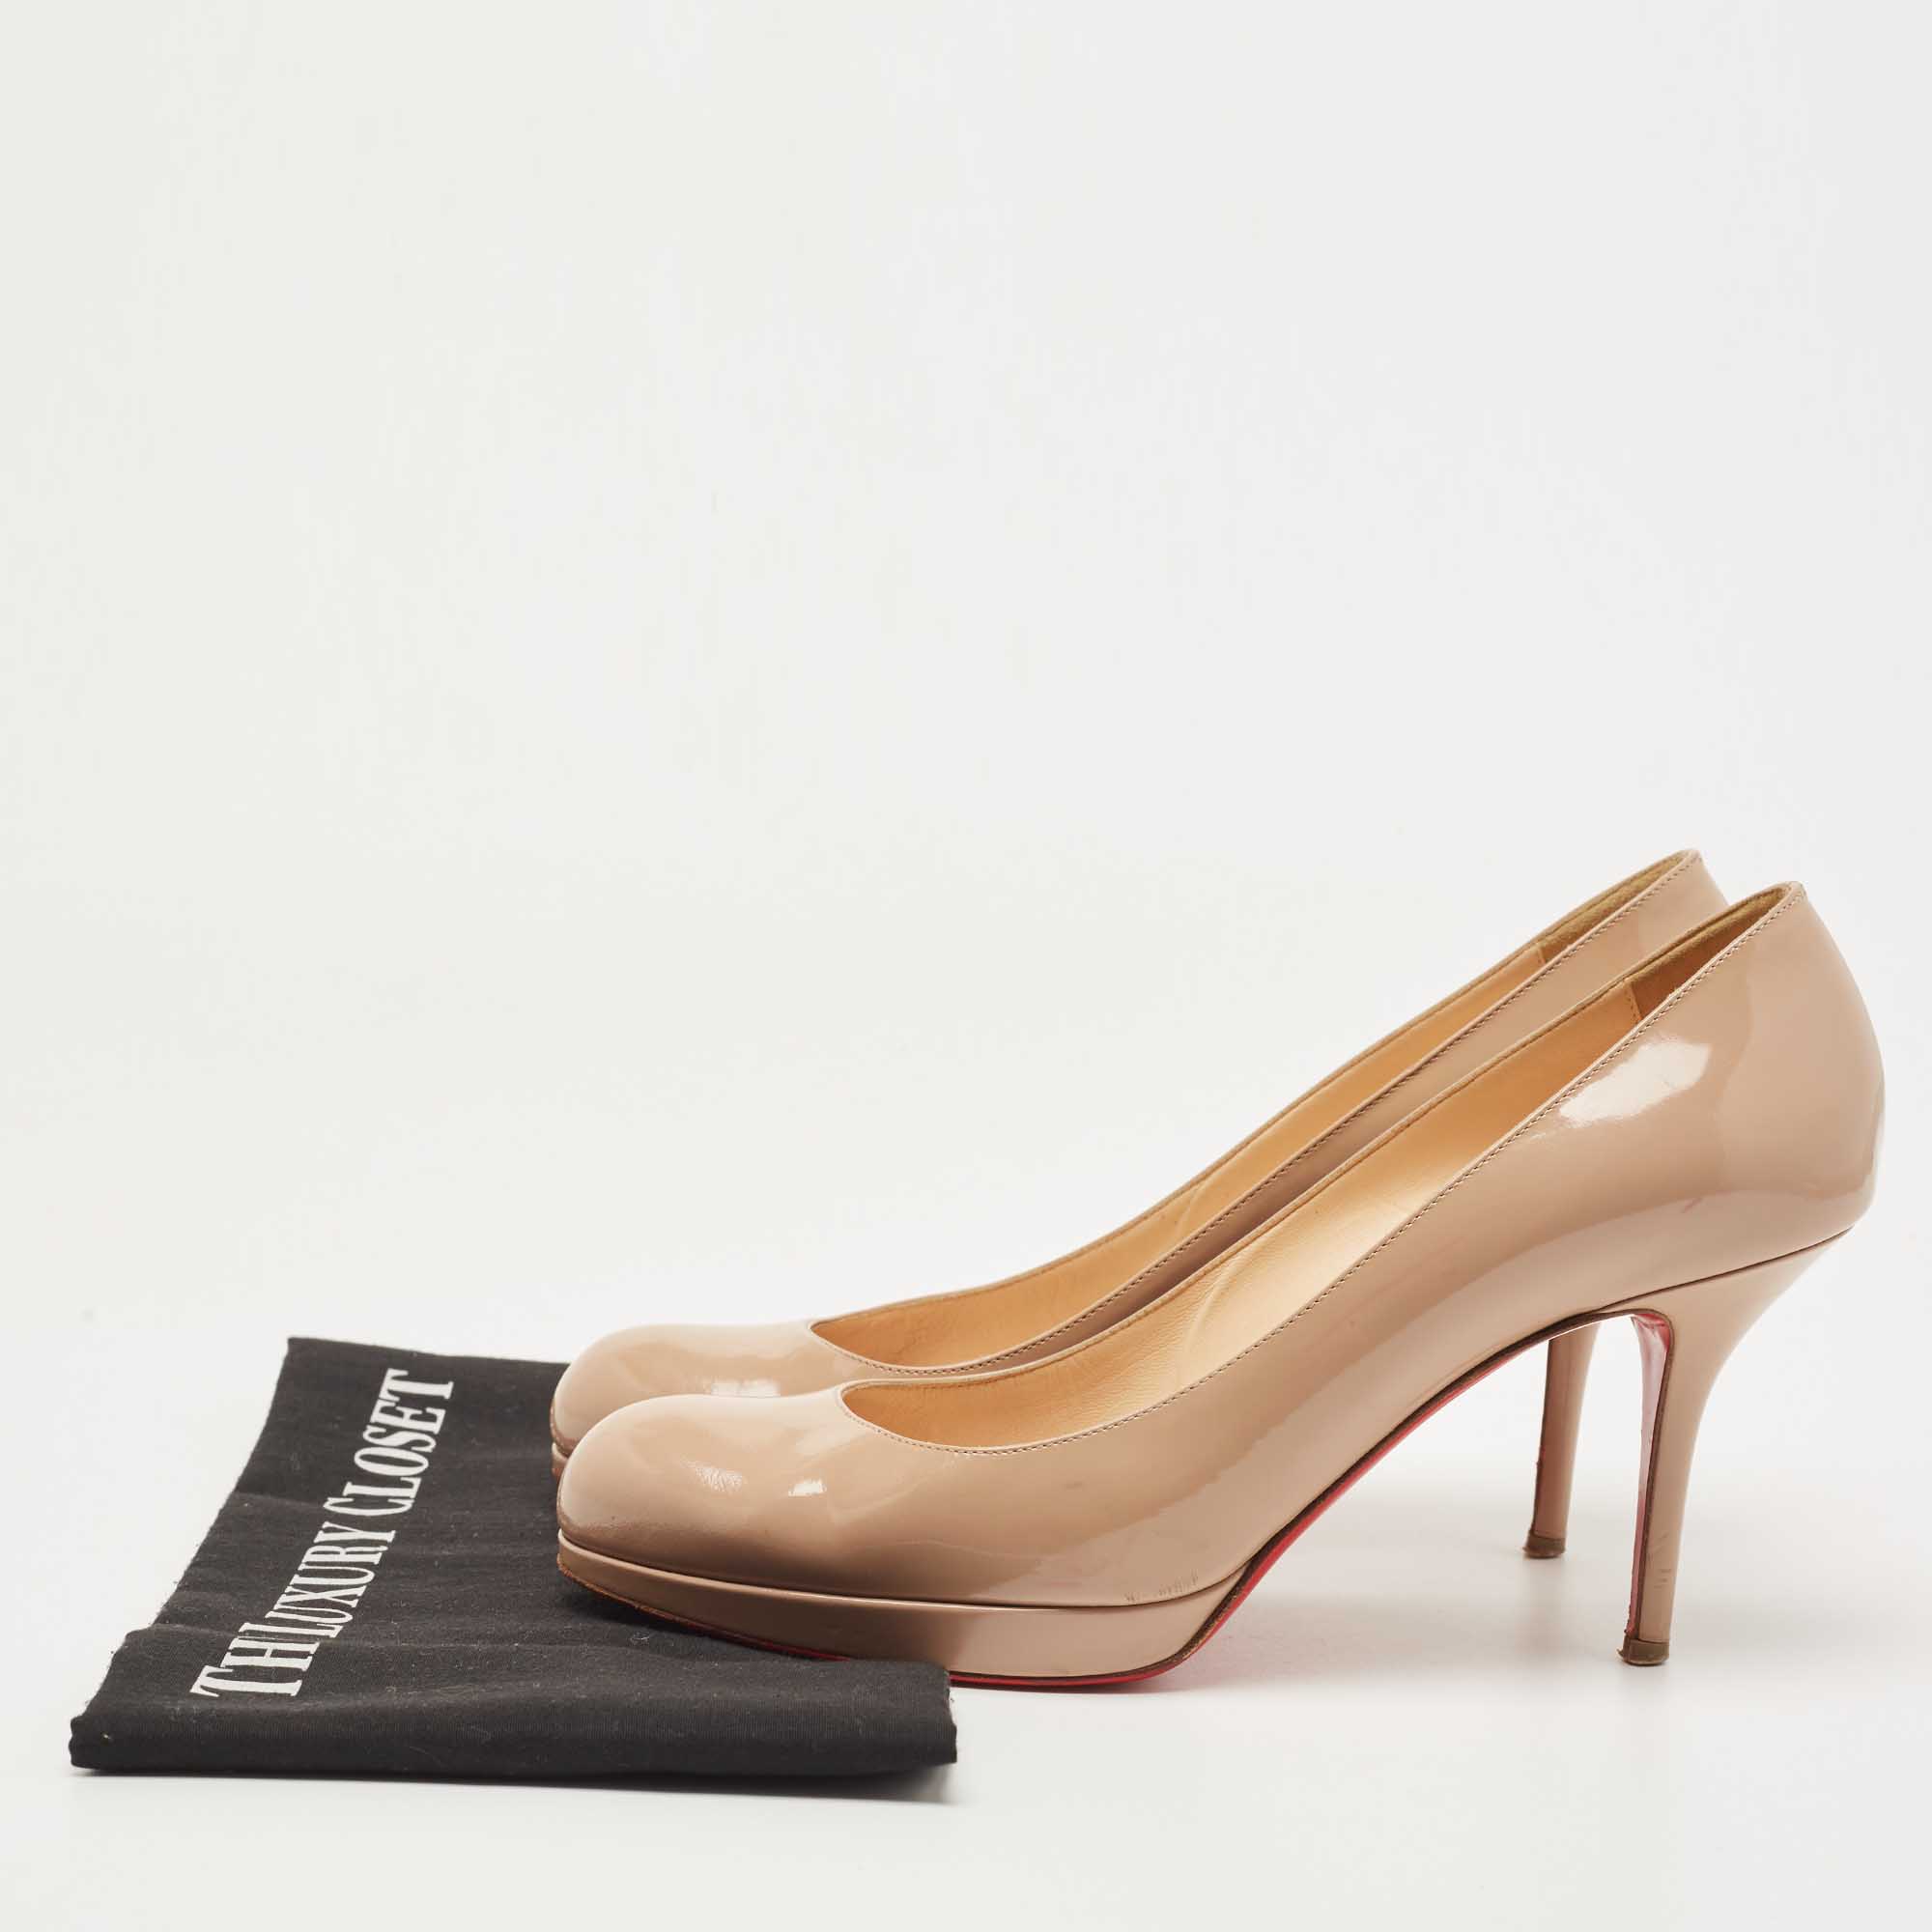 Christian Louboutin Beige Patent New Simple Pumps Size 40